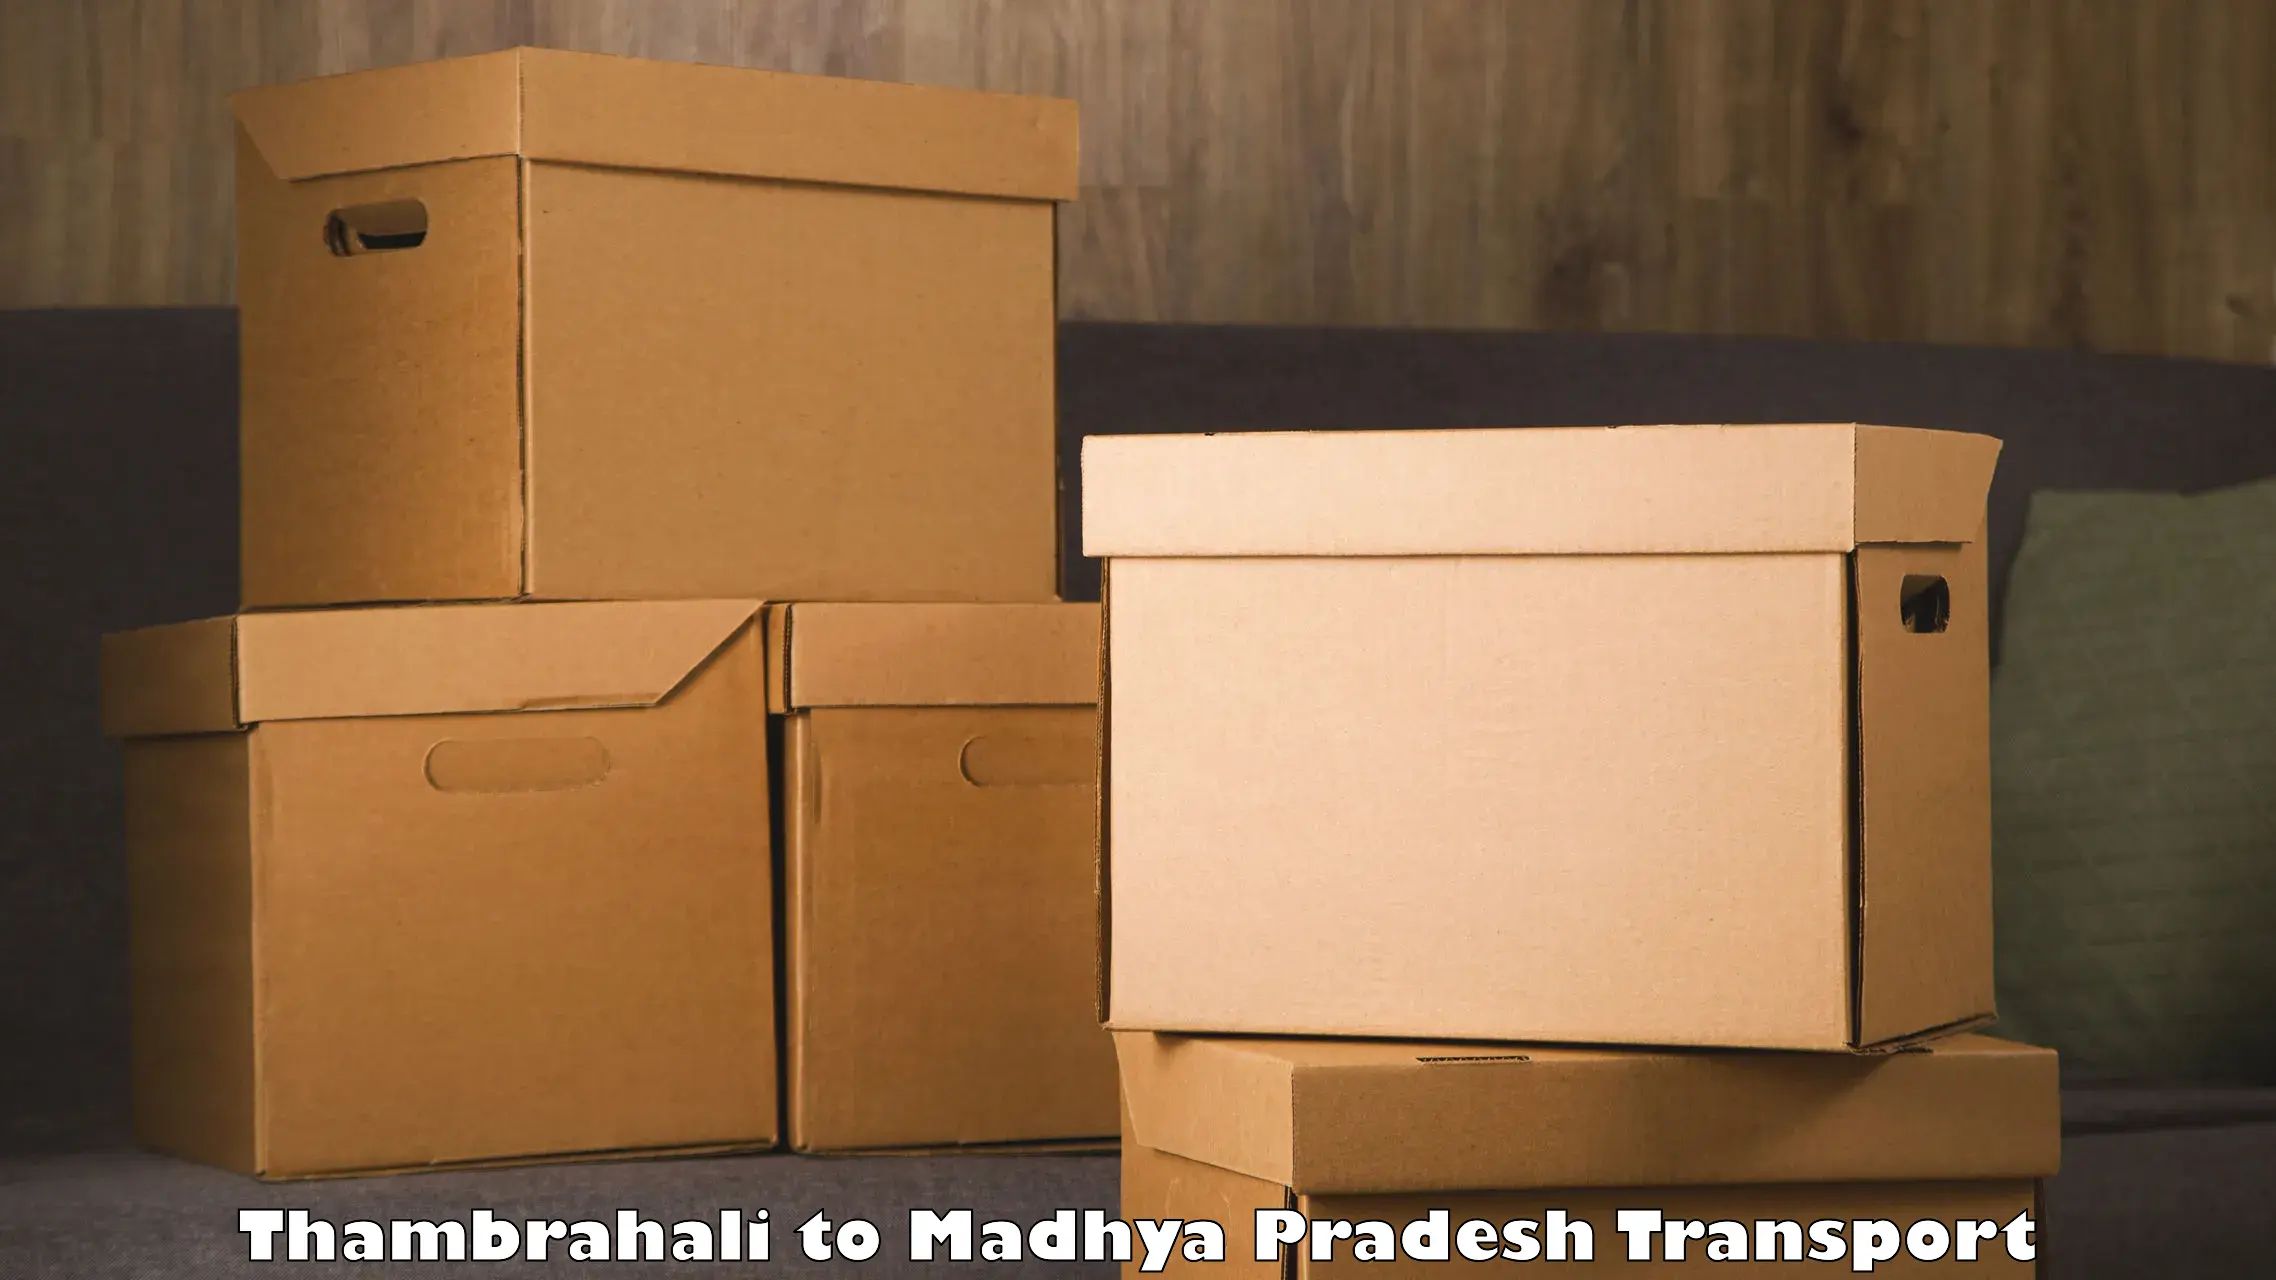 Container transport service Thambrahali to Sausar